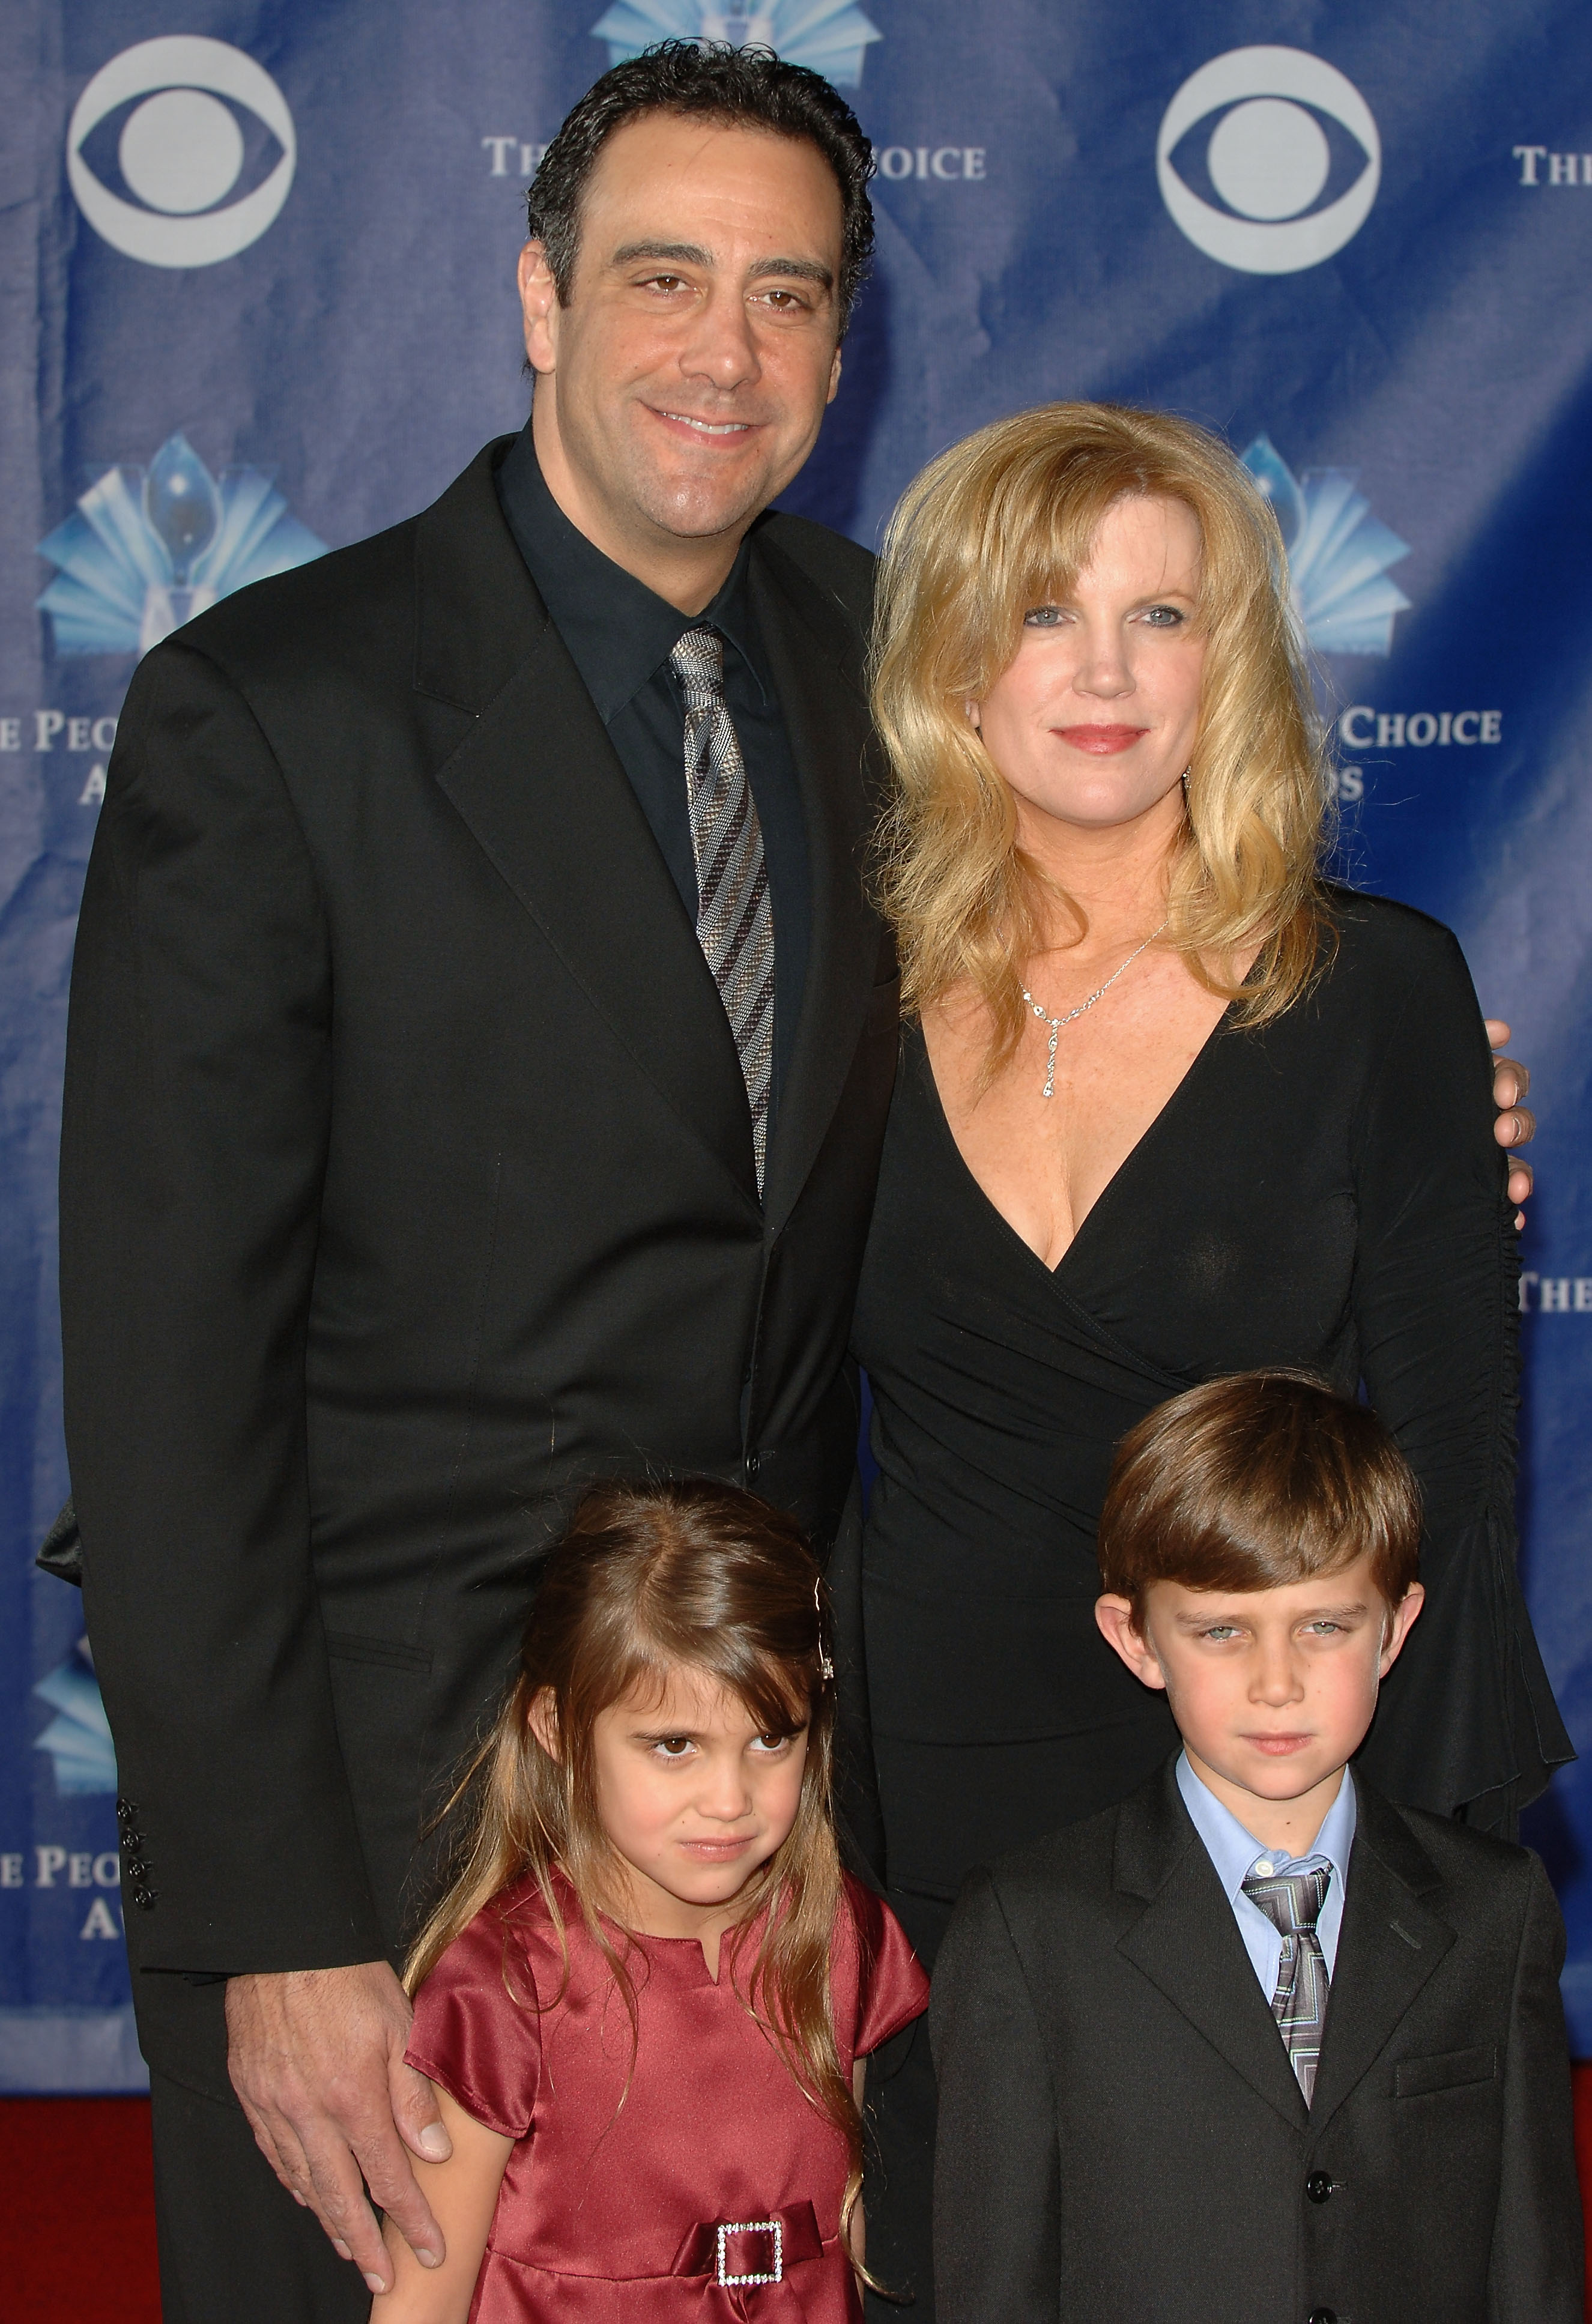 Brad Garrett, Jill Diven and their childrern Maxwell and Hope at the 32nd Annual People's Choice Awards on January 10, 2006, in Los Angeles, California. | Source: Getty Images